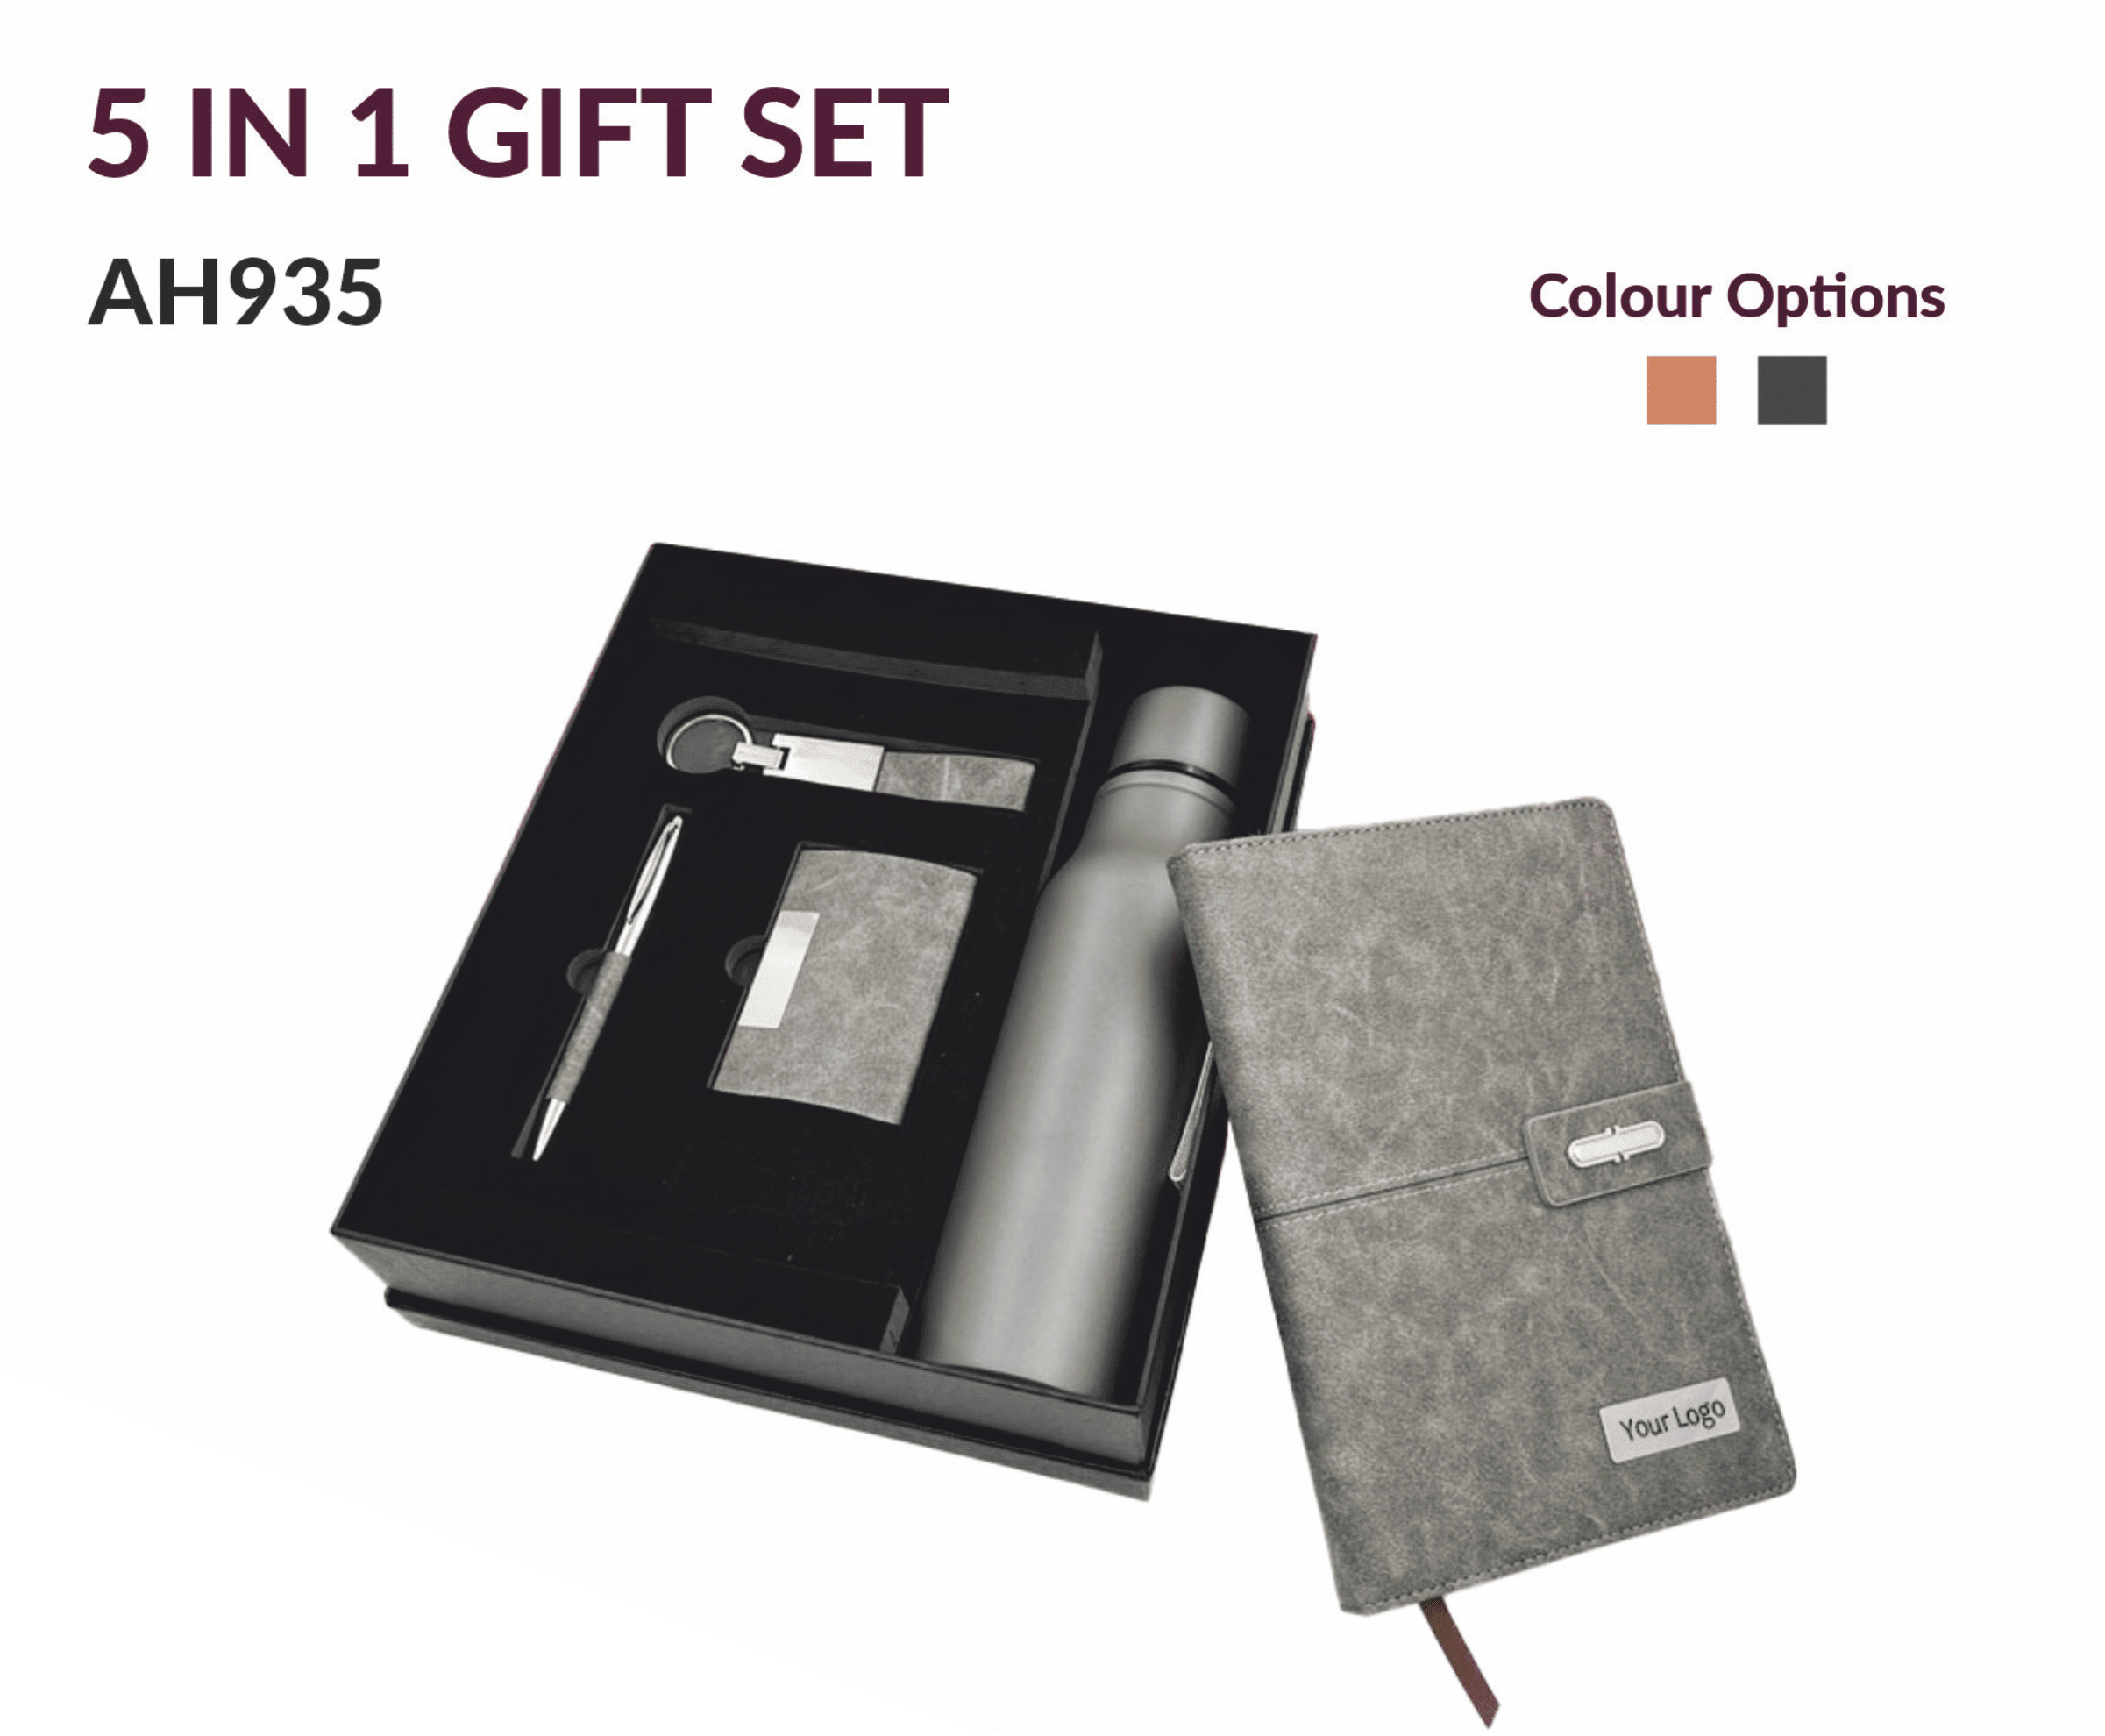 5 IN 1 GIFT SET